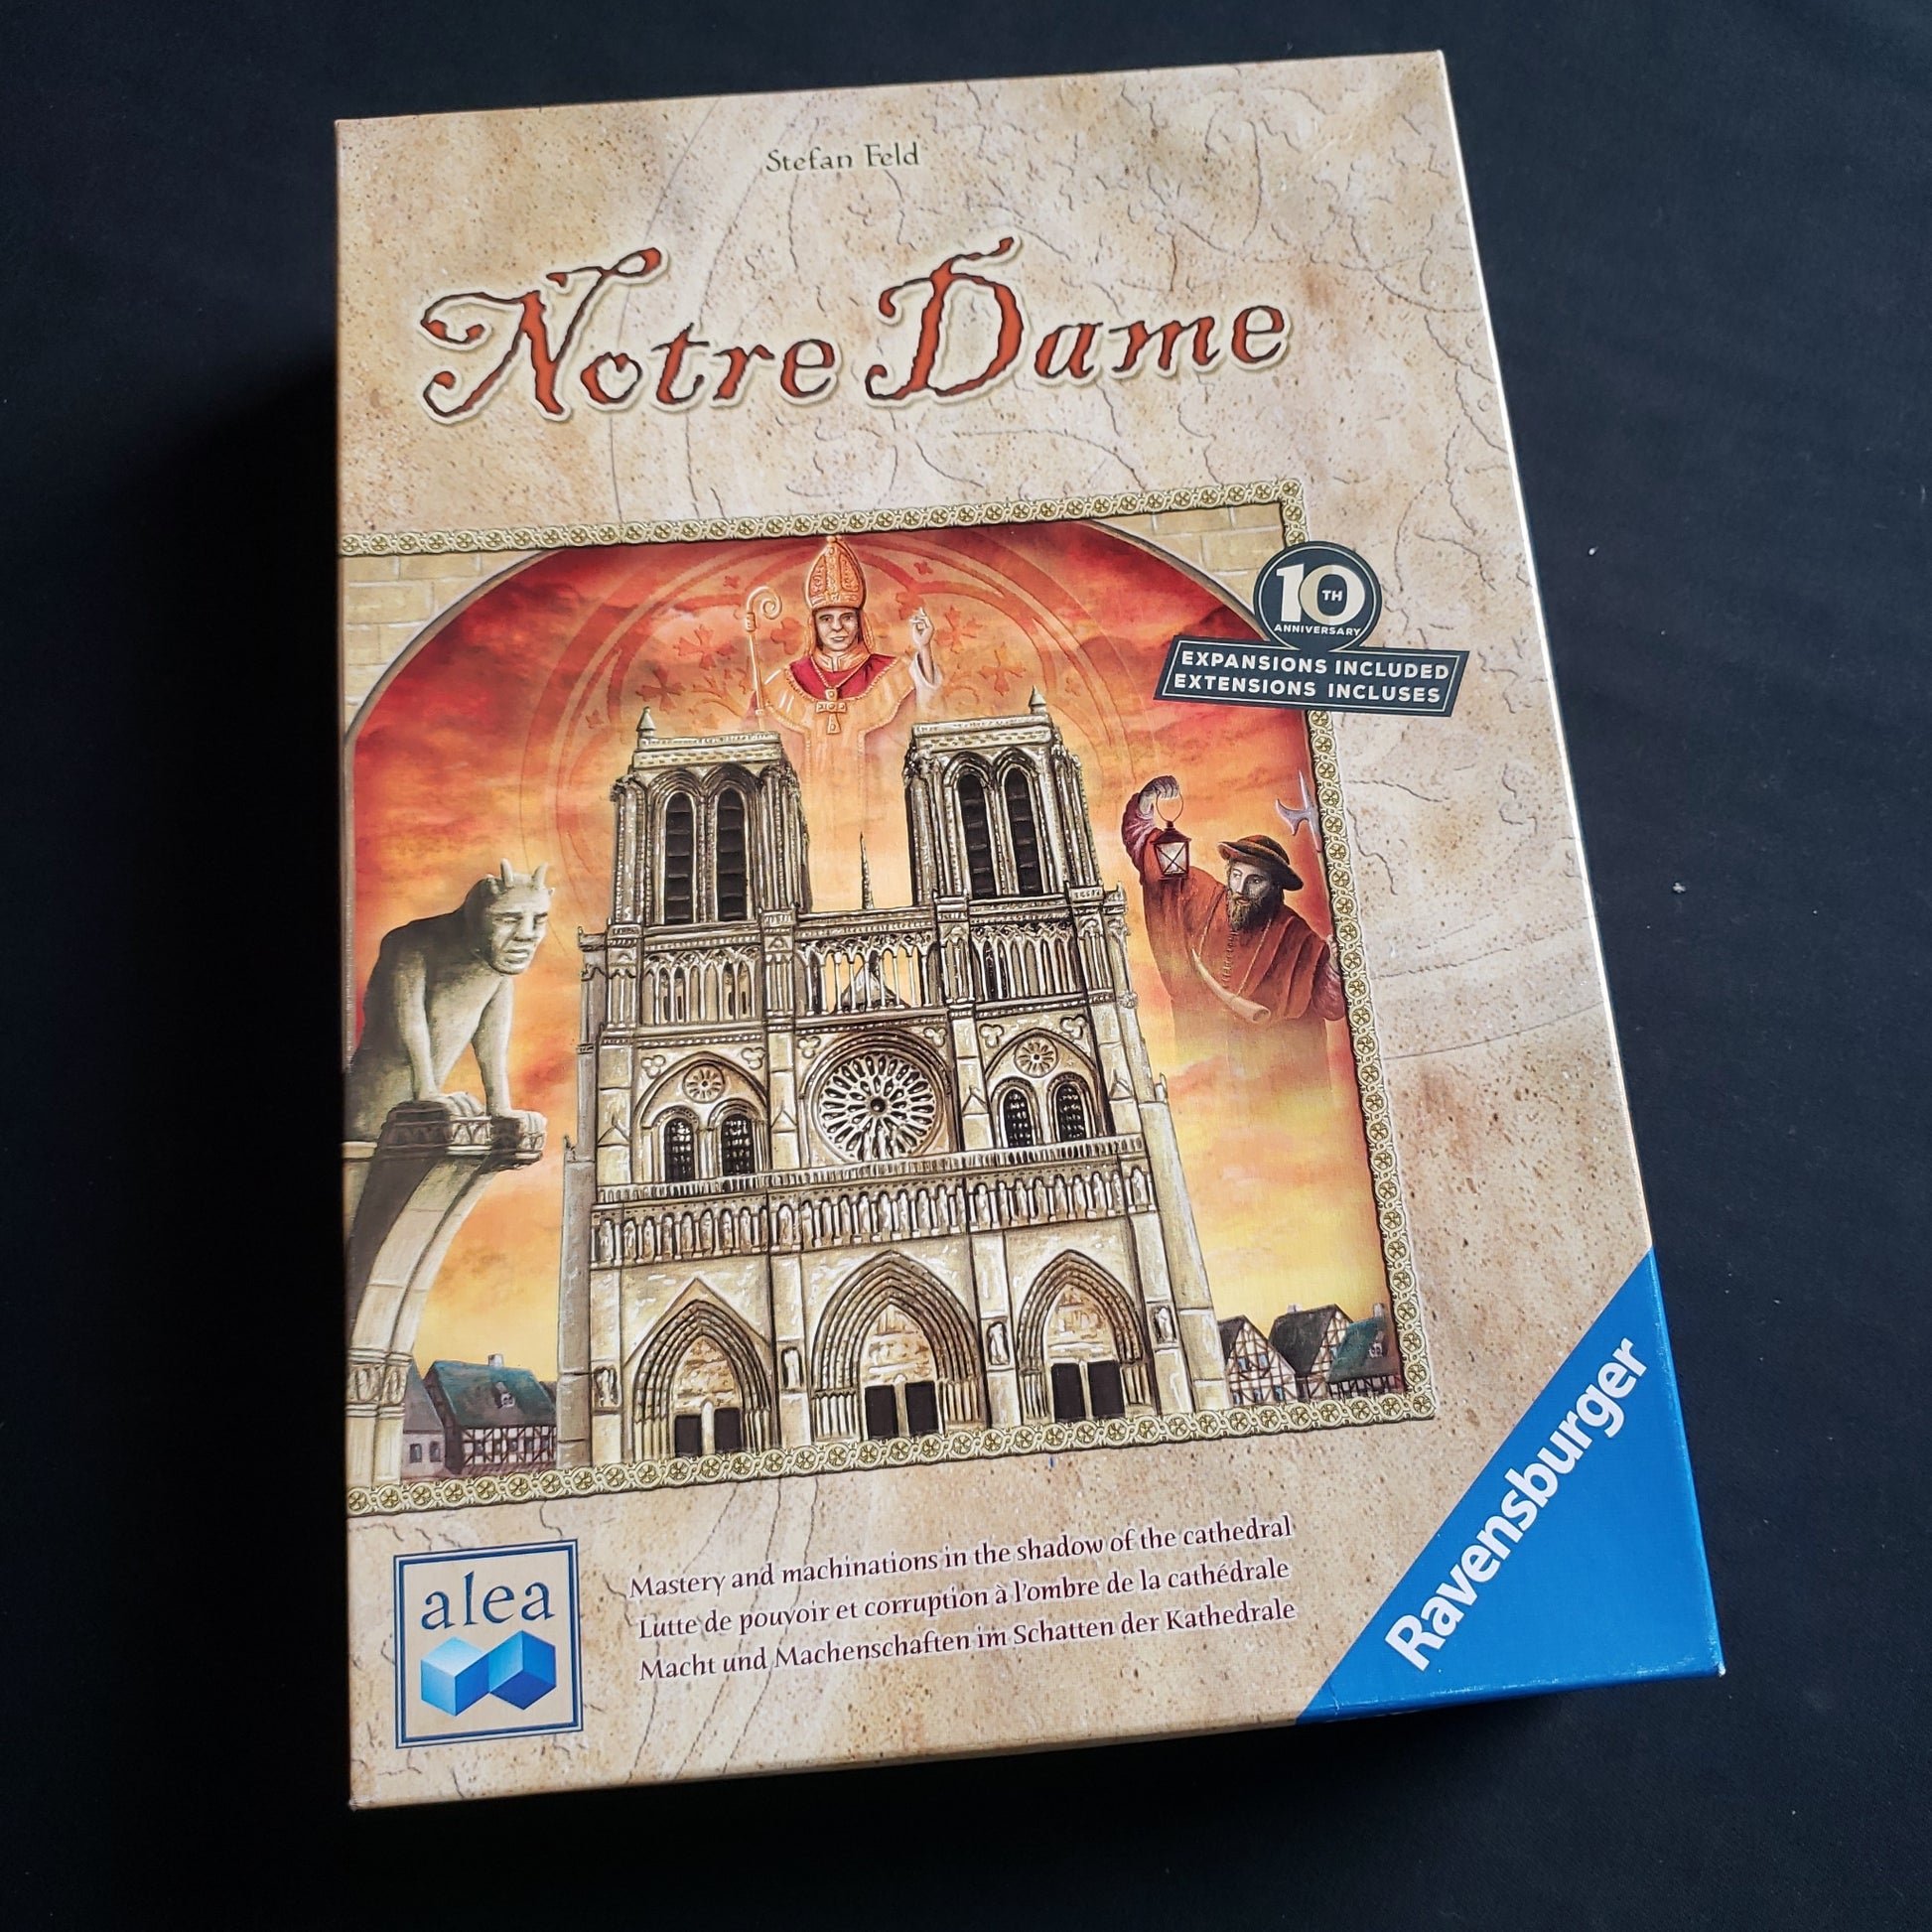 Image shows the front cover of the box of the Notre Dame: 10th Anniversary edition board game